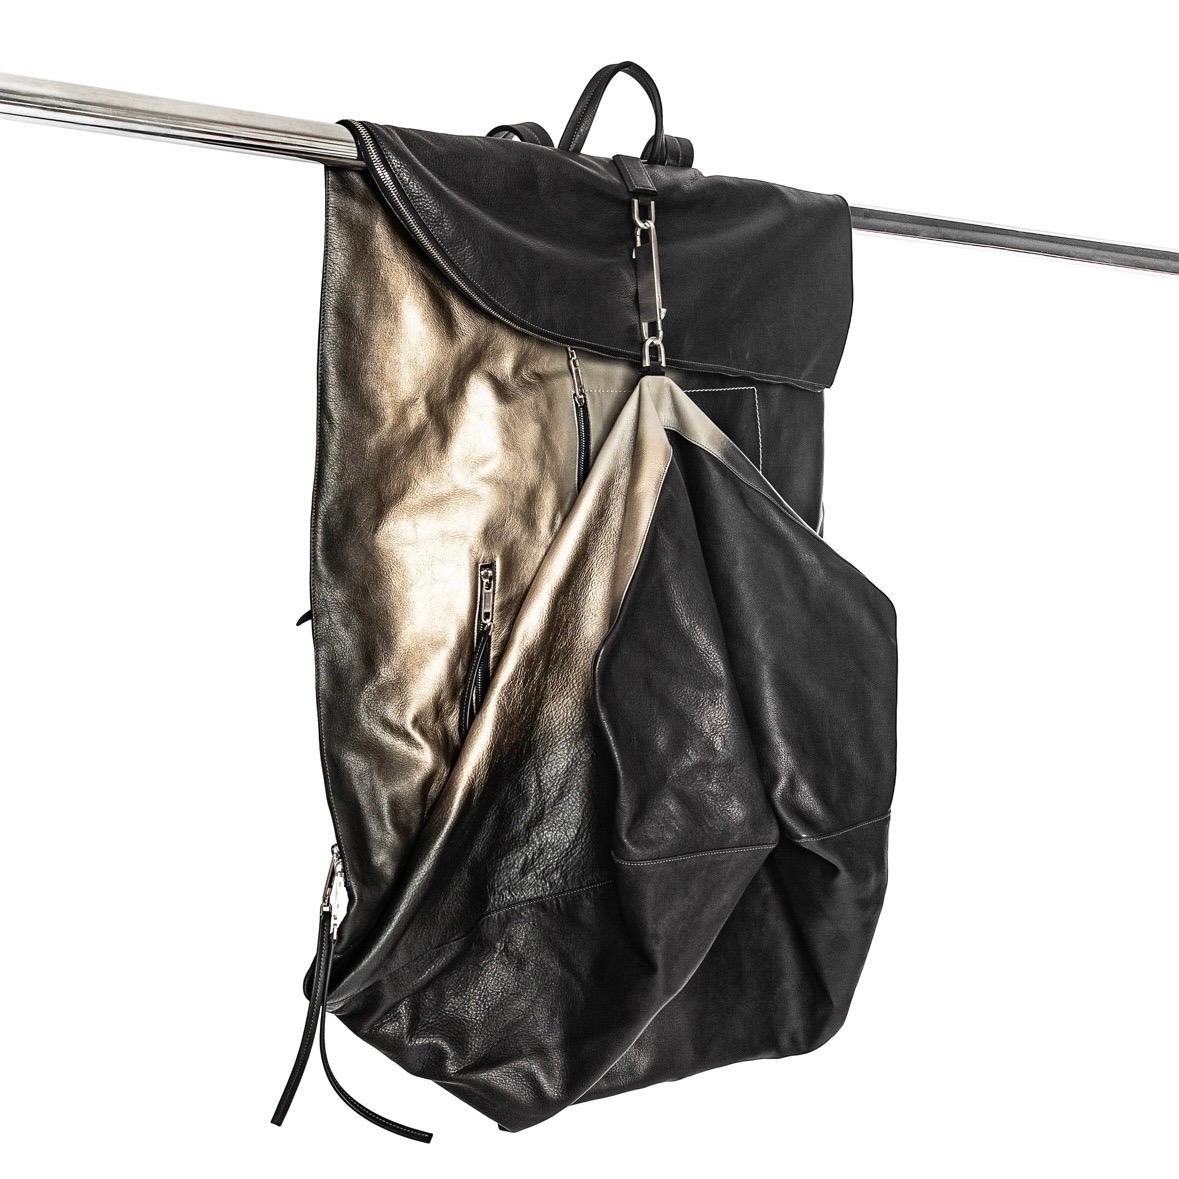 Rick Owens Larry Degrade Metallic Gradient and Black Leather Mega Duffle

From Spring 2019 Larry LeGaspi inspired collection
Limited Edition﻿
Metallic gradient over a soft black with overdye
Silver-tone hardware
Asymmetrical upper
Detachable handle